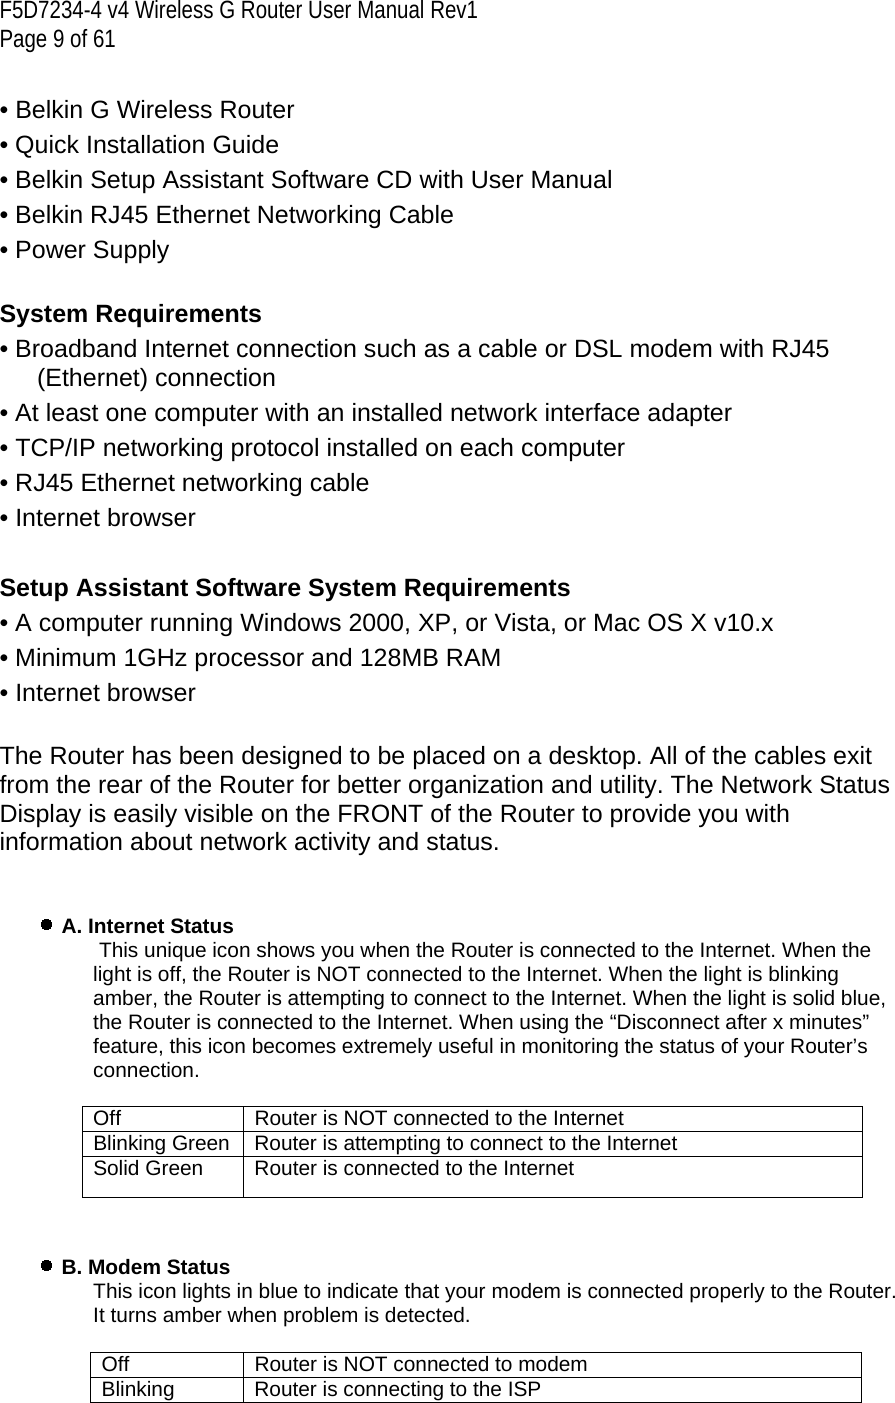 F5D7234-4 v4 Wireless G Router User Manual Rev1  Page 9 of 61   • Belkin G Wireless Router • Quick Installation Guide • Belkin Setup Assistant Software CD with User Manual • Belkin RJ45 Ethernet Networking Cable • Power Supply  System Requirements • Broadband Internet connection such as a cable or DSL modem with RJ45 (Ethernet) connection • At least one computer with an installed network interface adapter • TCP/IP networking protocol installed on each computer • RJ45 Ethernet networking cable • Internet browser  Setup Assistant Software System Requirements • A computer running Windows 2000, XP, or Vista, or Mac OS X v10.x • Minimum 1GHz processor and 128MB RAM • Internet browser The Router has been designed to be placed on a desktop. All of the cables exit from the rear of the Router for better organization and utility. The Network Status Display is easily visible on the FRONT of the Router to provide you with information about network activity and status.    A. Internet Status   This unique icon shows you when the Router is connected to the Internet. When the light is off, the Router is NOT connected to the Internet. When the light is blinking amber, the Router is attempting to connect to the Internet. When the light is solid blue, the Router is connected to the Internet. When using the “Disconnect after x minutes” feature, this icon becomes extremely useful in monitoring the status of your Router’s connection.  Off  Router is NOT connected to the Internet Blinking Green  Router is attempting to connect to the Internet Solid Green  Router is connected to the Internet     B. Modem Status This icon lights in blue to indicate that your modem is connected properly to the Router. It turns amber when problem is detected.  Off  Router is NOT connected to modem Blinking  Router is connecting to the ISP 